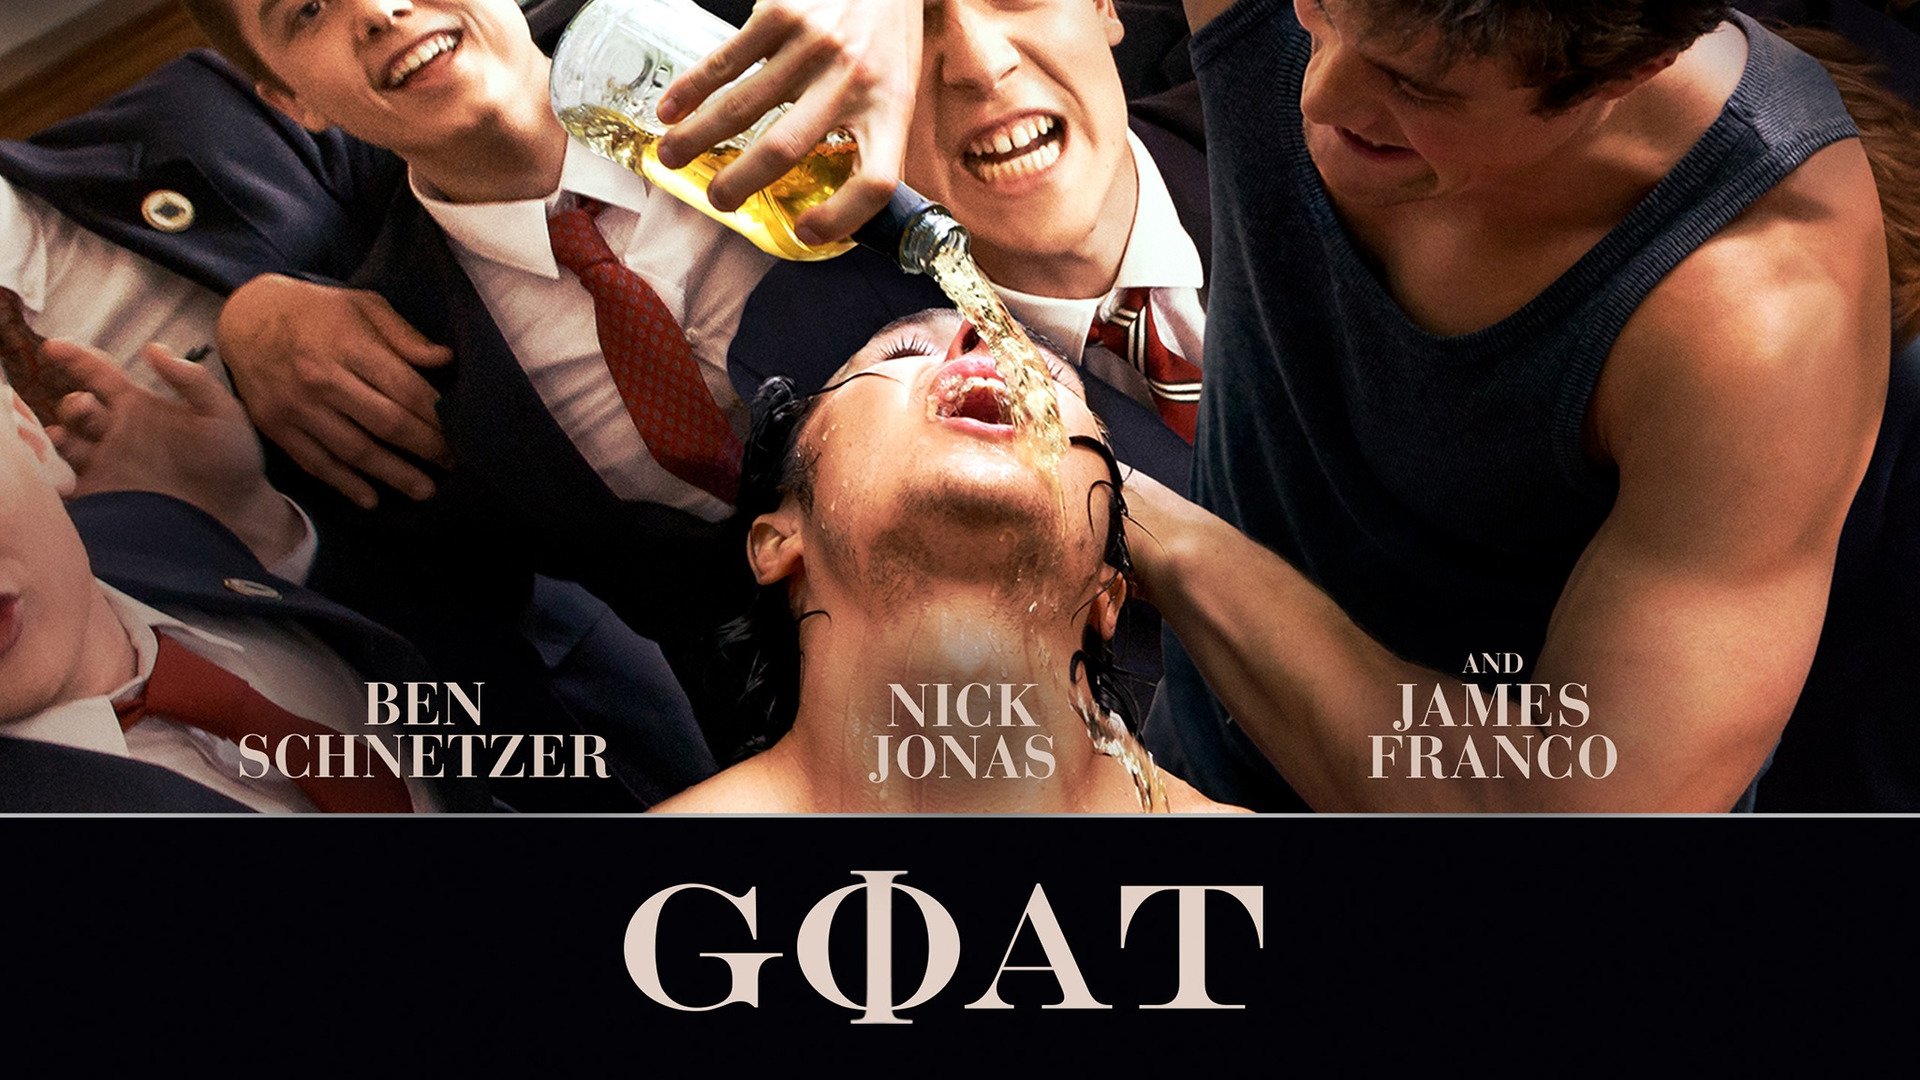 Goat Trailer 1 Trailers And Videos Rotten Tomatoes 